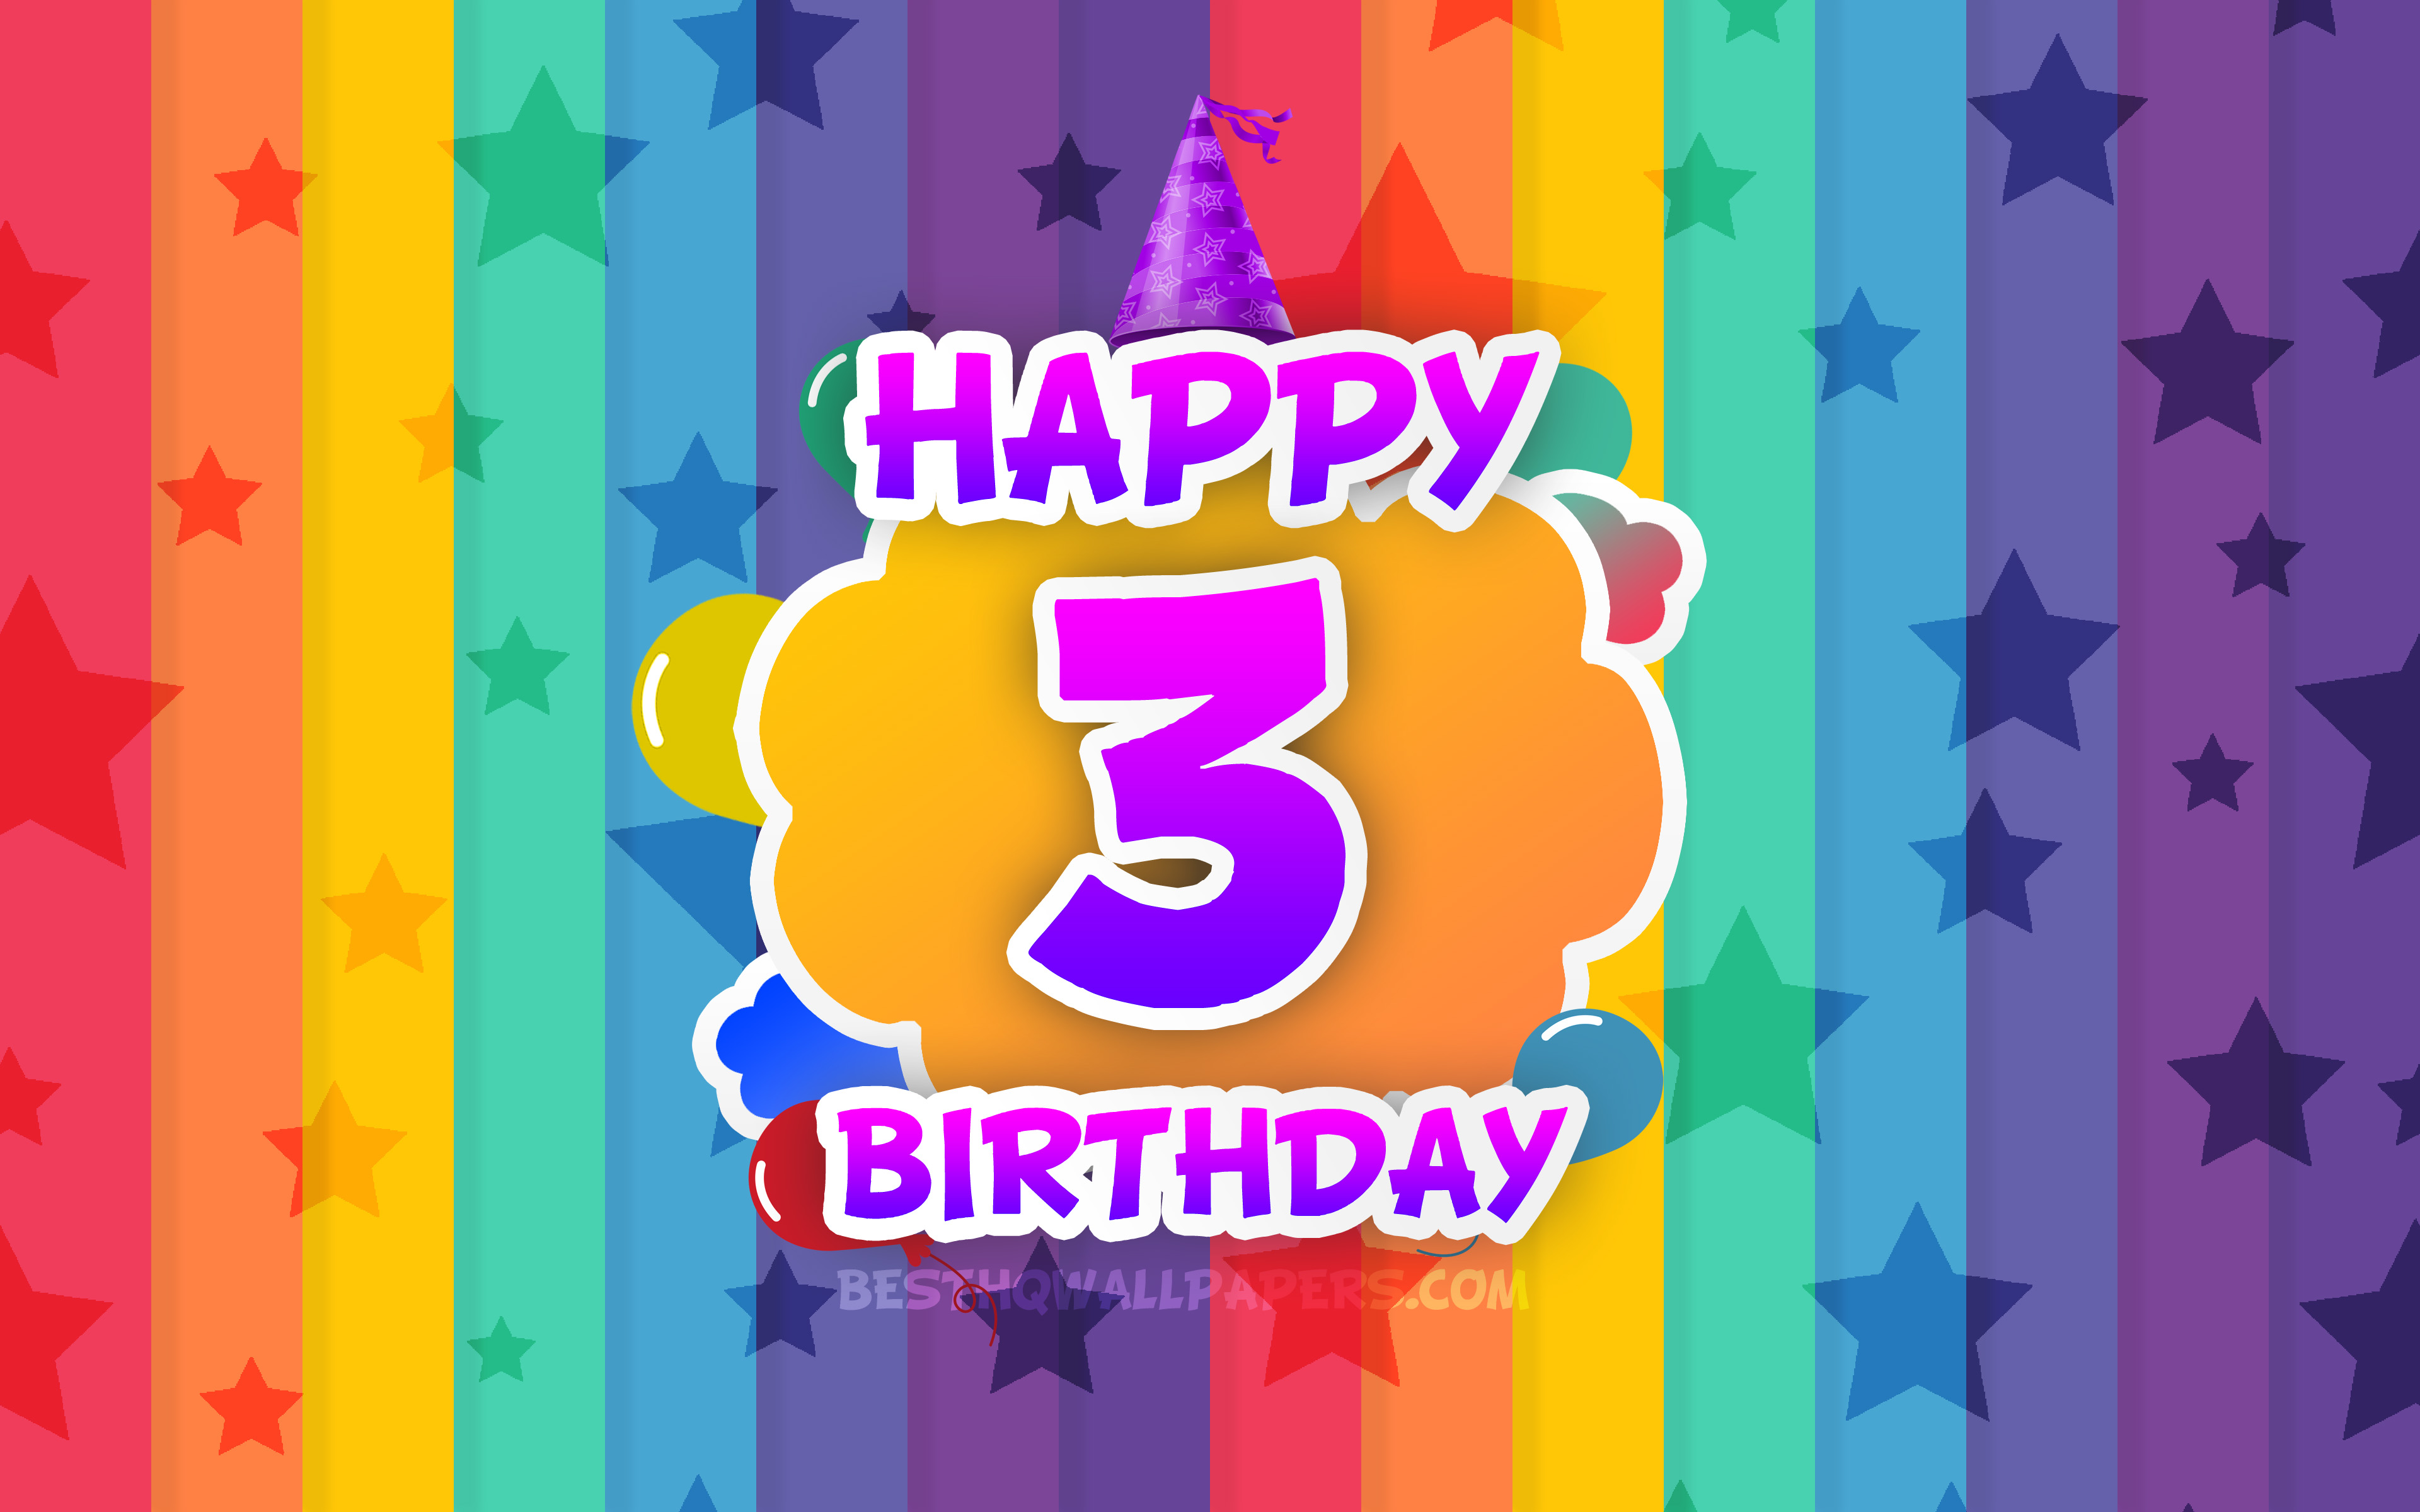 Download wallpaper Happy 3rd birthday, colorful clouds, 4k, Birthday concept, rainbow background, Happy 3 Years Birthday, creative 3D letters, 3rd Birthday, Birthday Party, 3rd Birthday Party for desktop with resolution 3840x2400. High